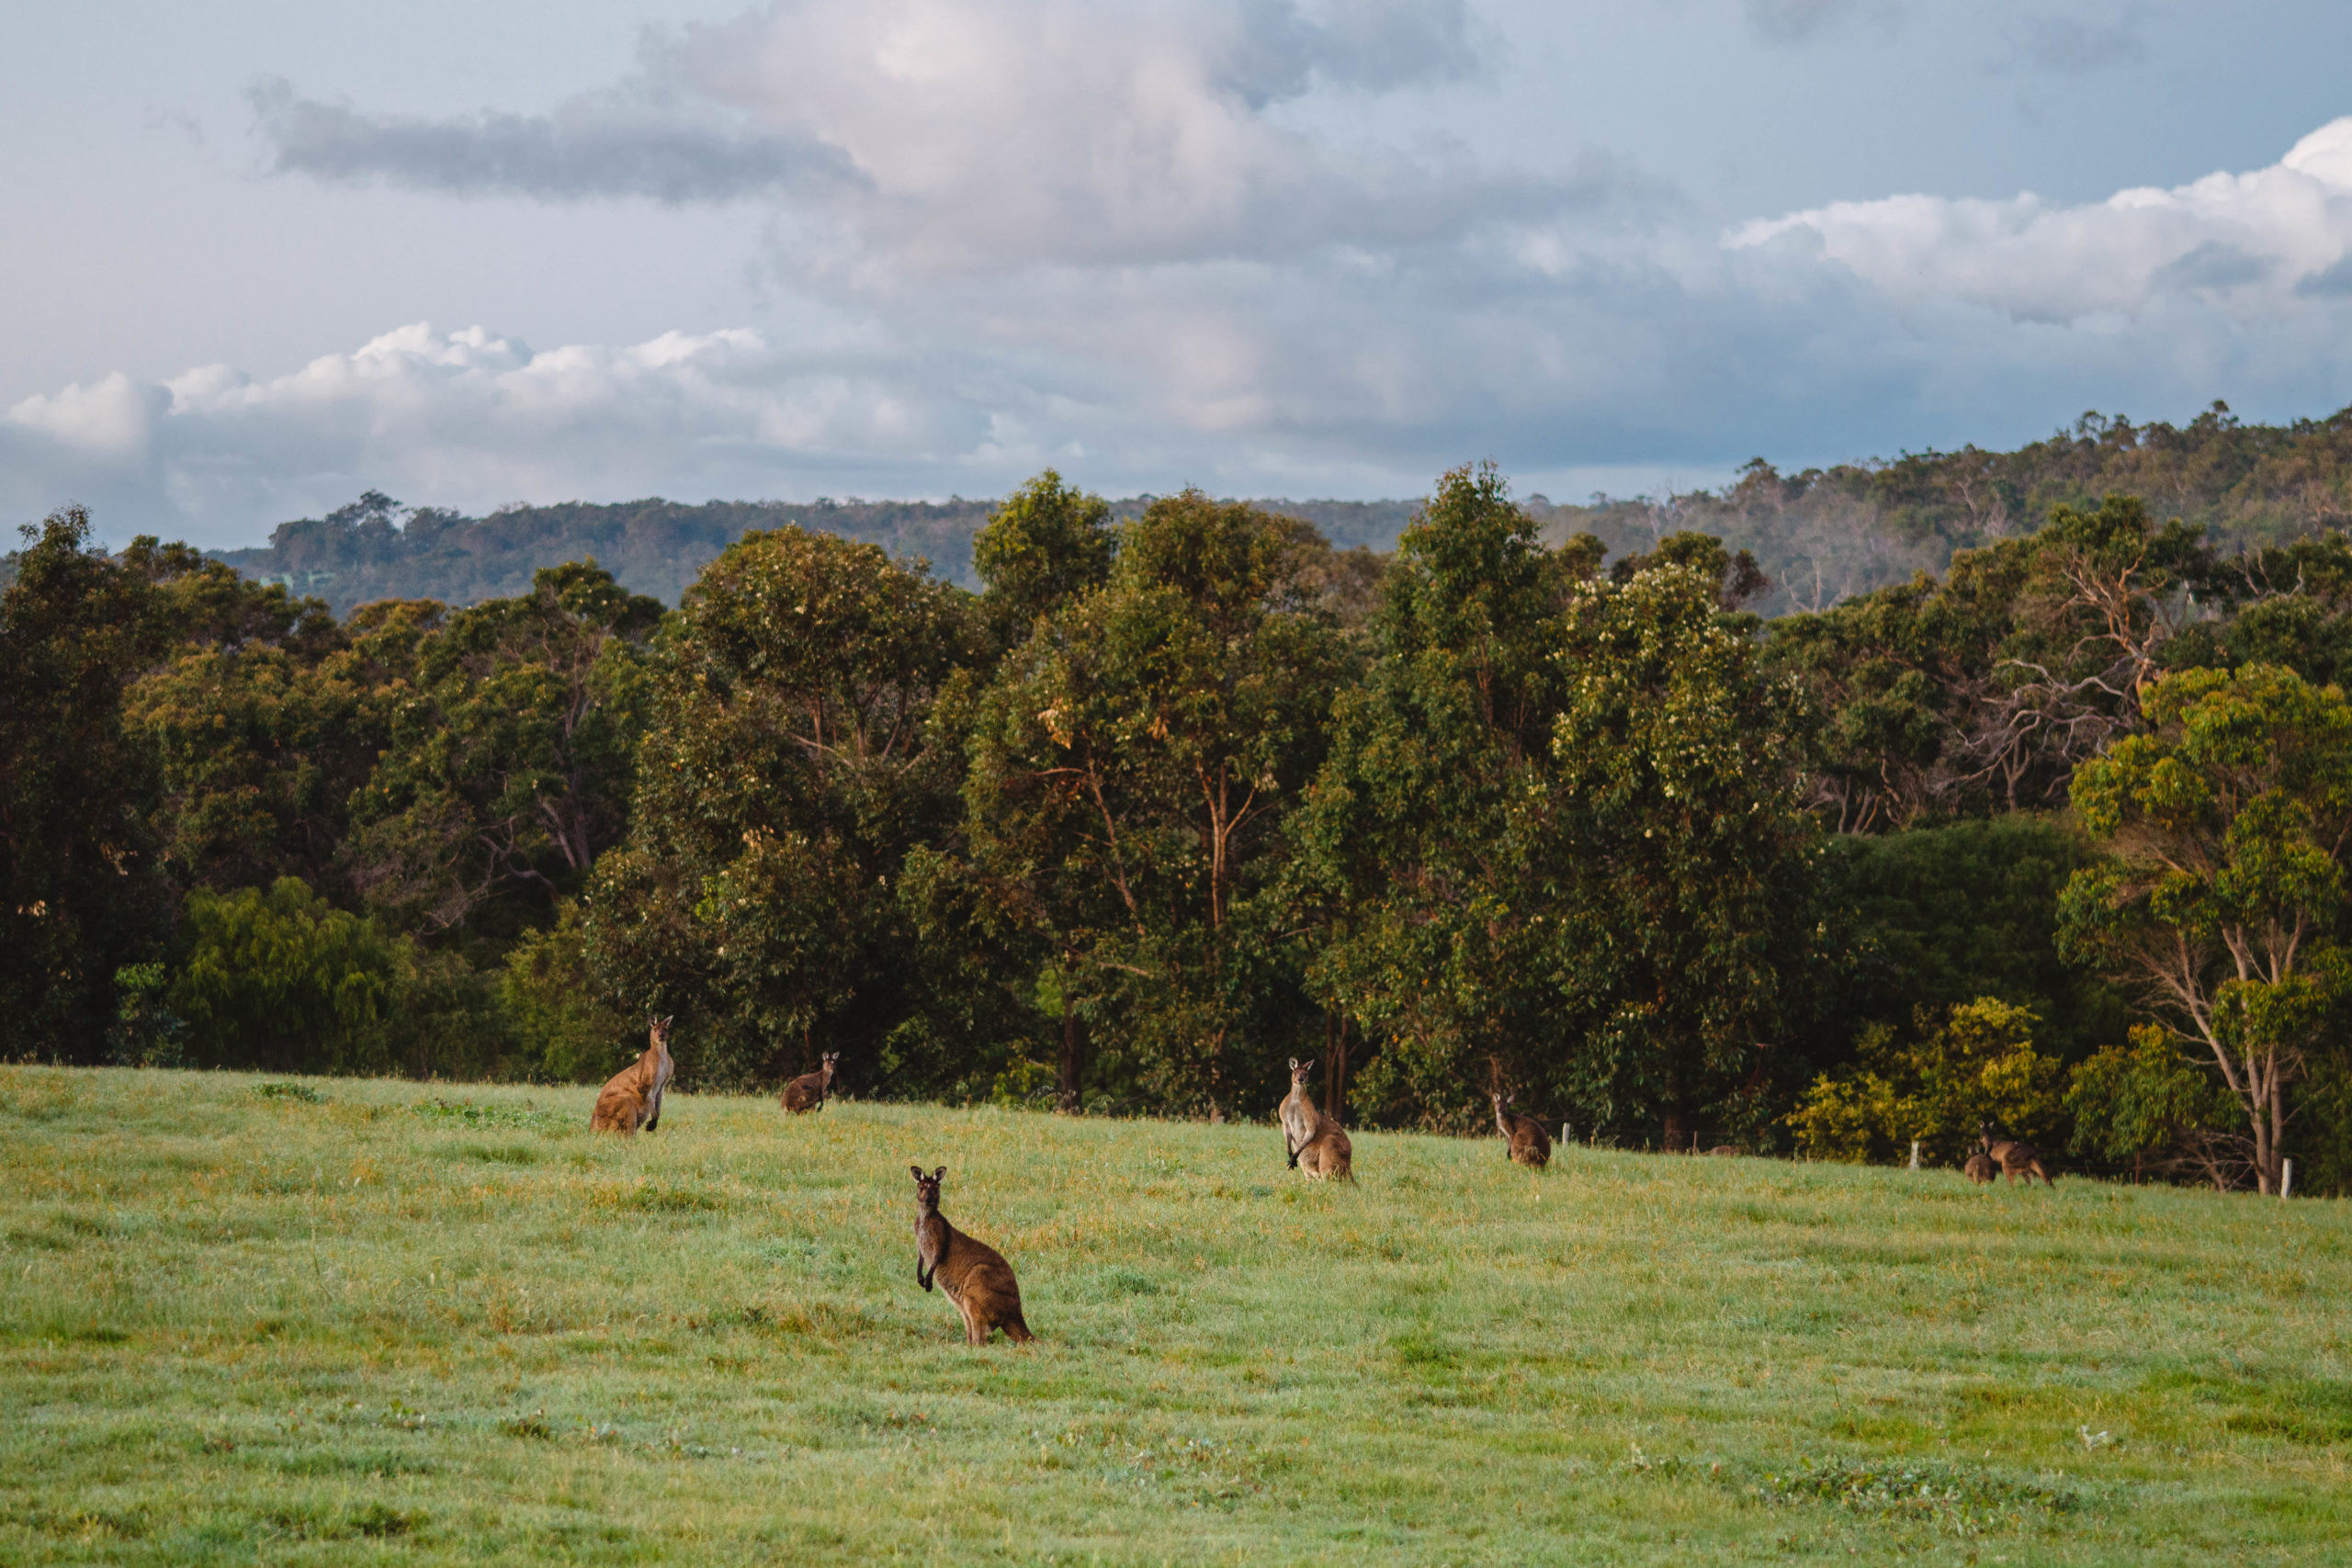 Mob of kangaroos in a field. Credit Dylan Alcock